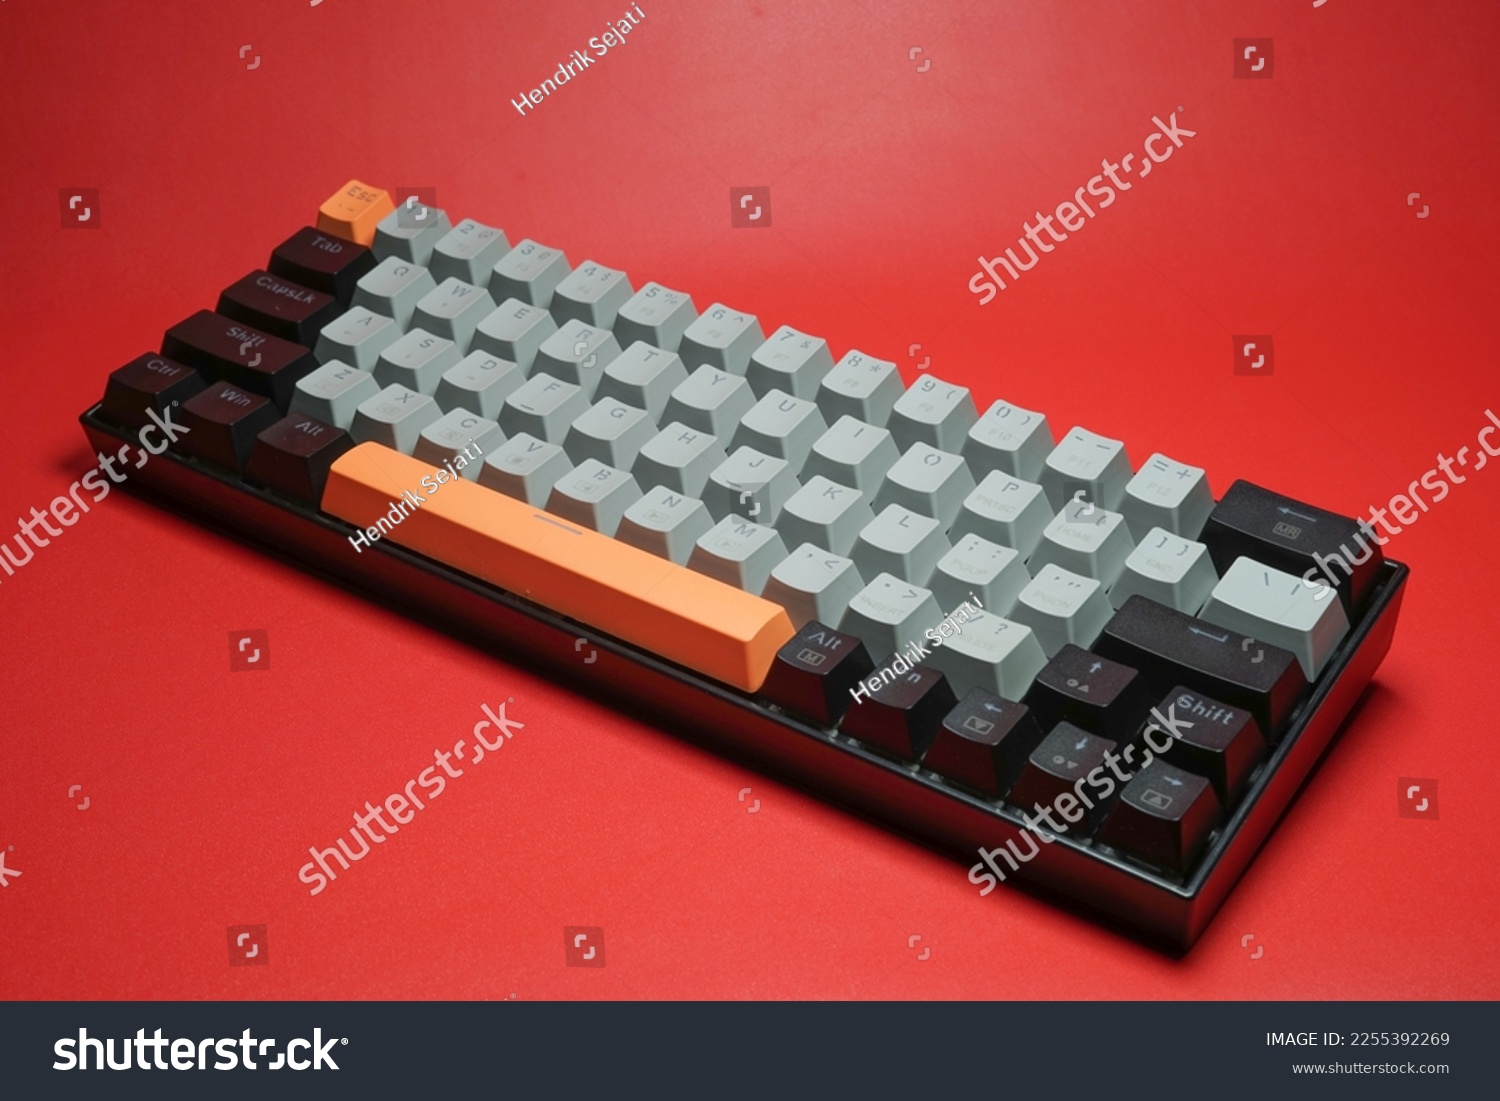 Mechanical keyboard with colorful keys and minimalist design on red background isolated #2255392269